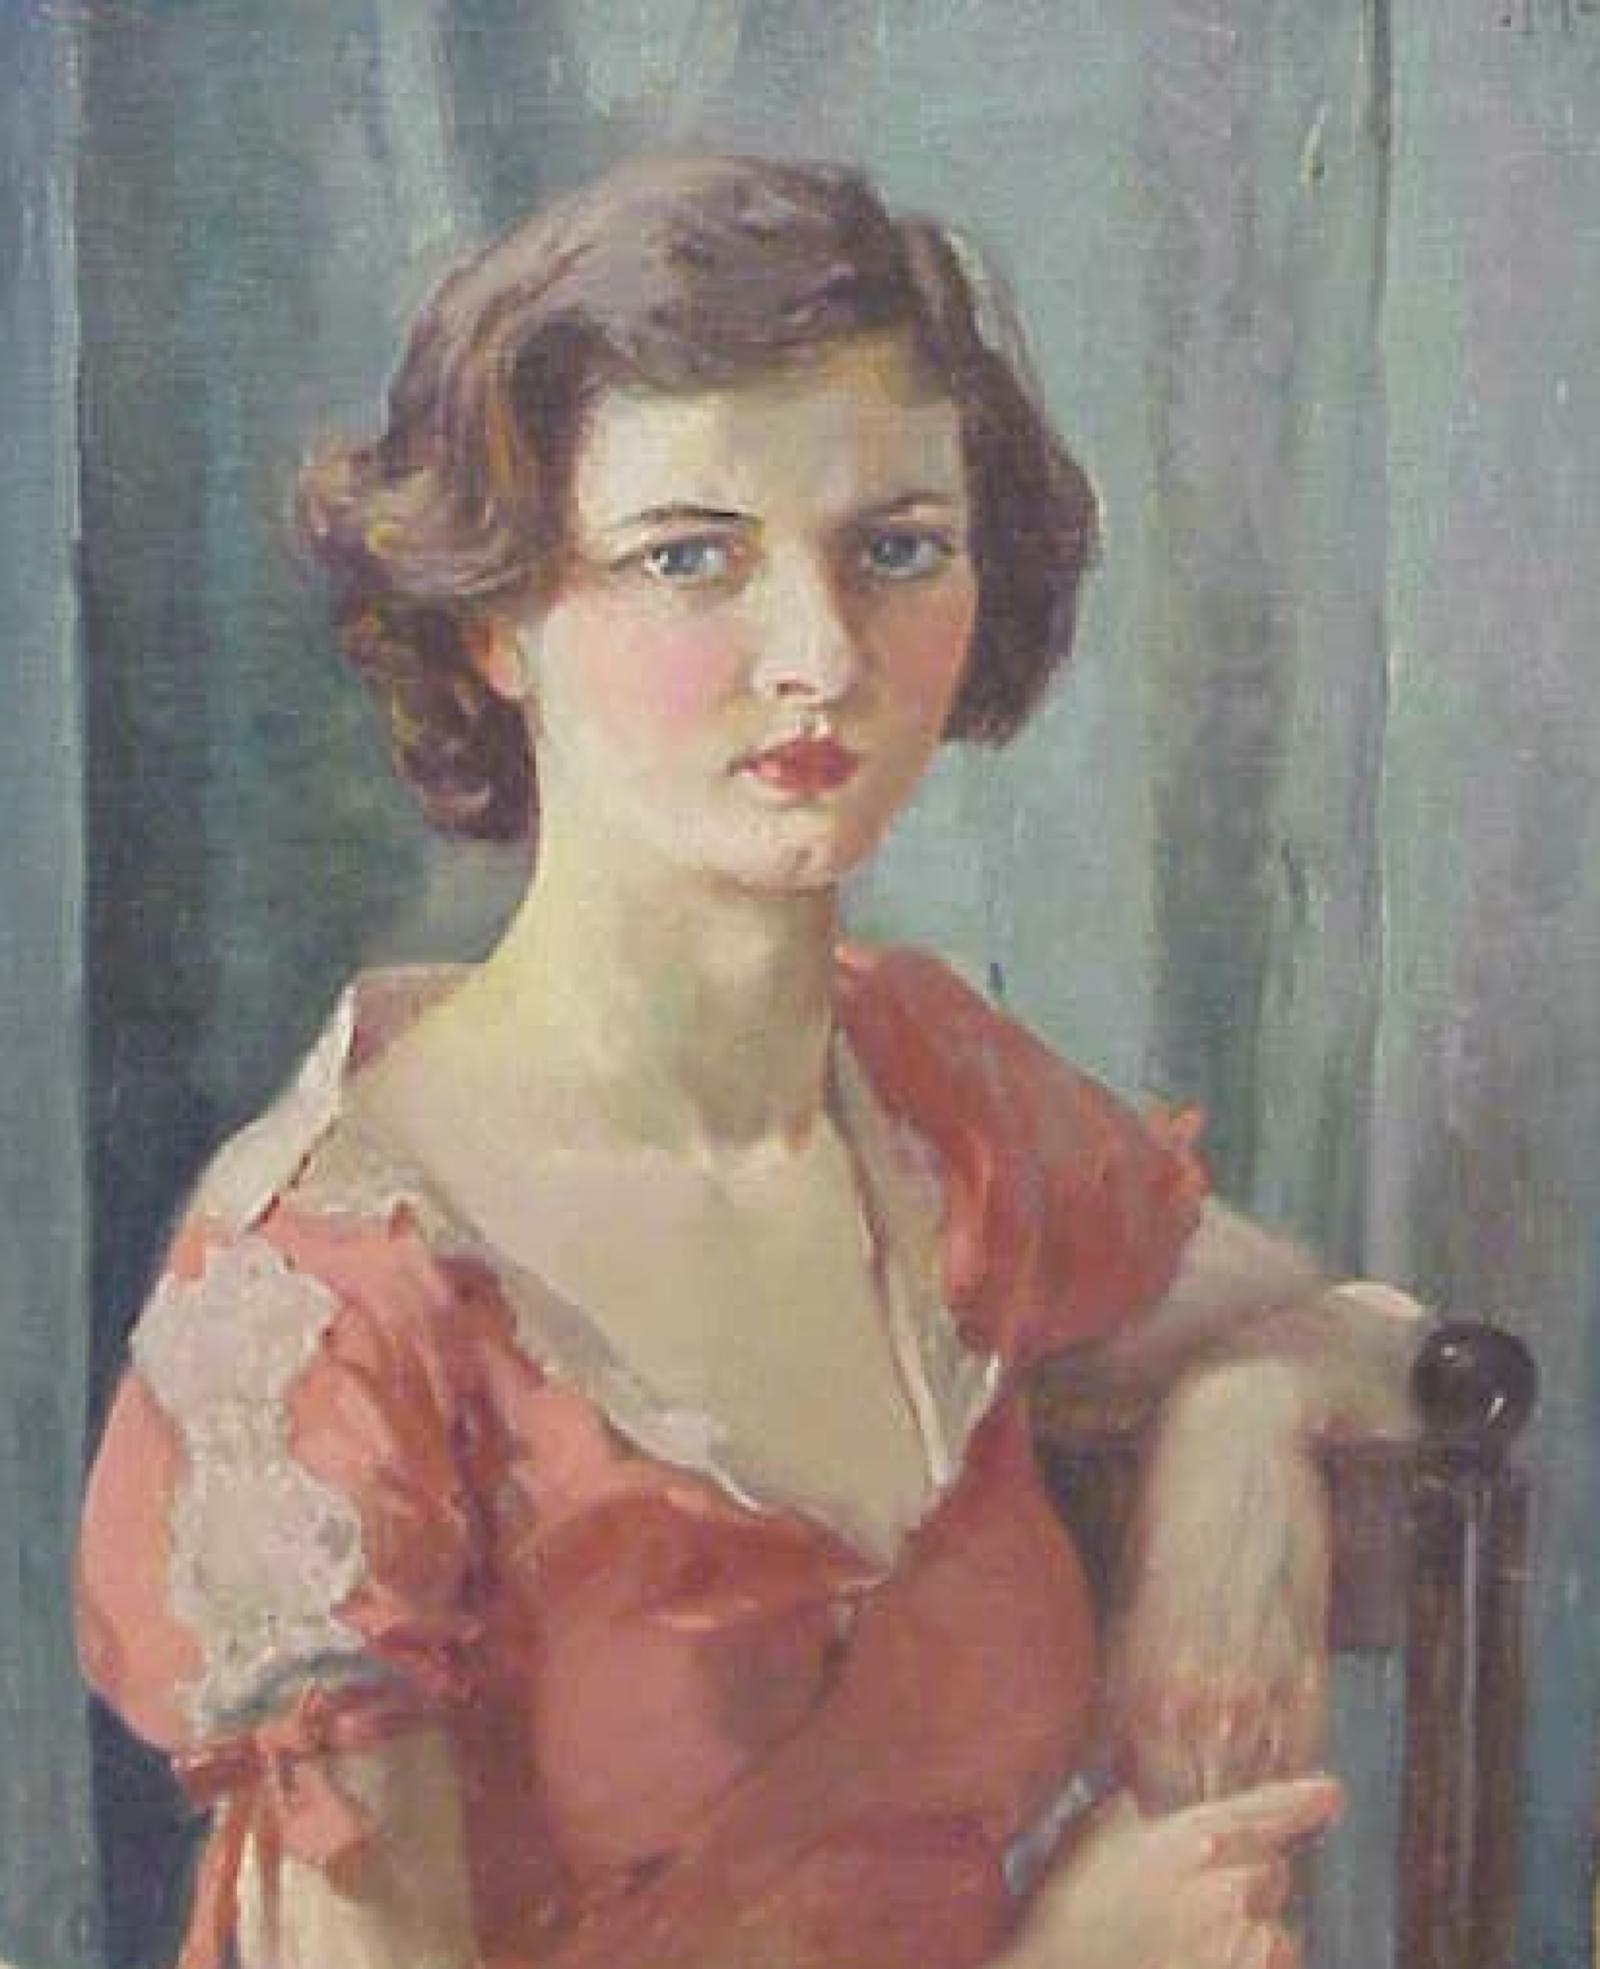 Young woman in pink dress seated in wooden chair with one elbow resting on the back of the chair.